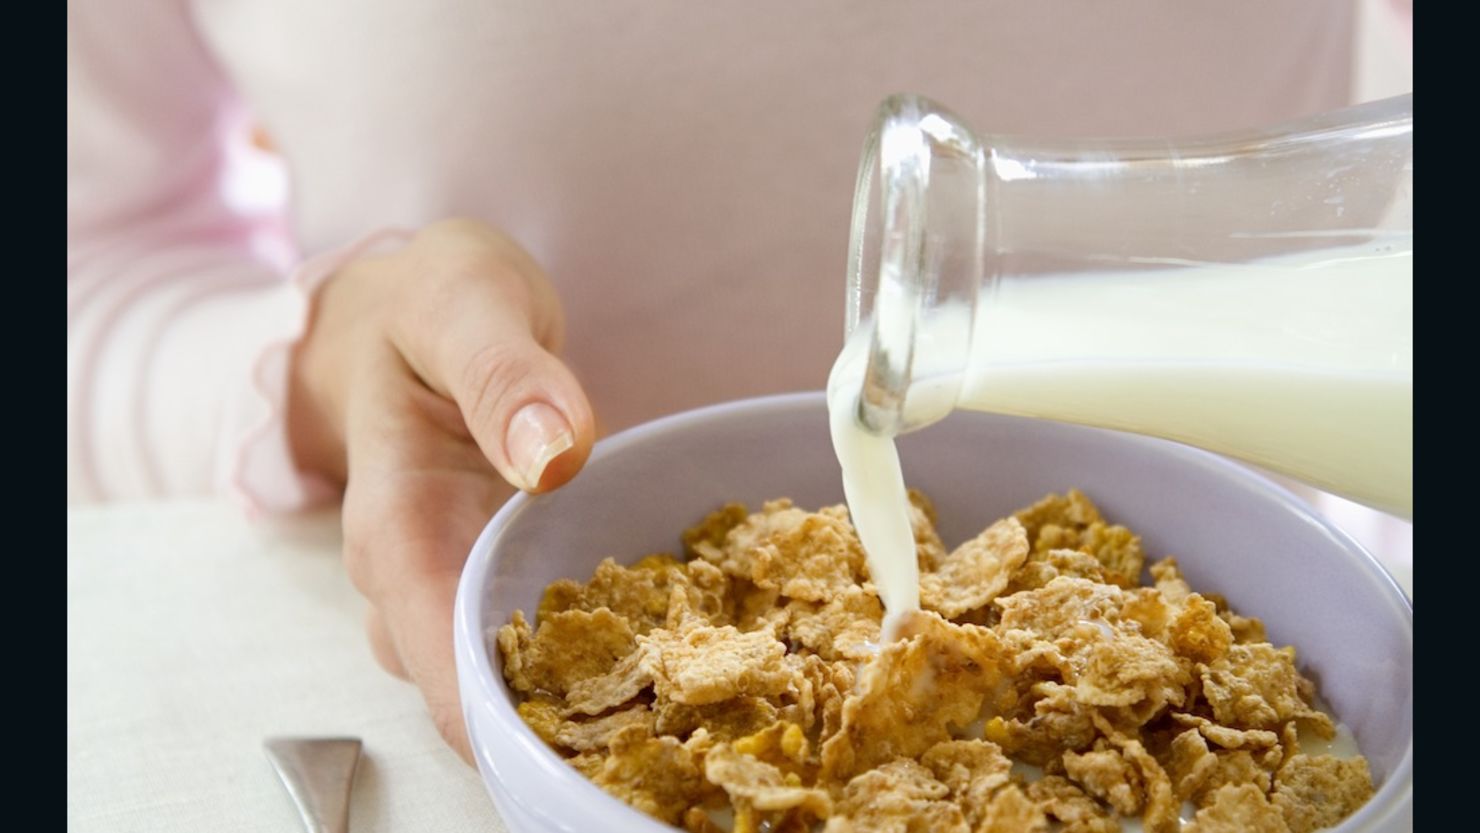 How Much Cereal & Milk Should You Have for Breakfast